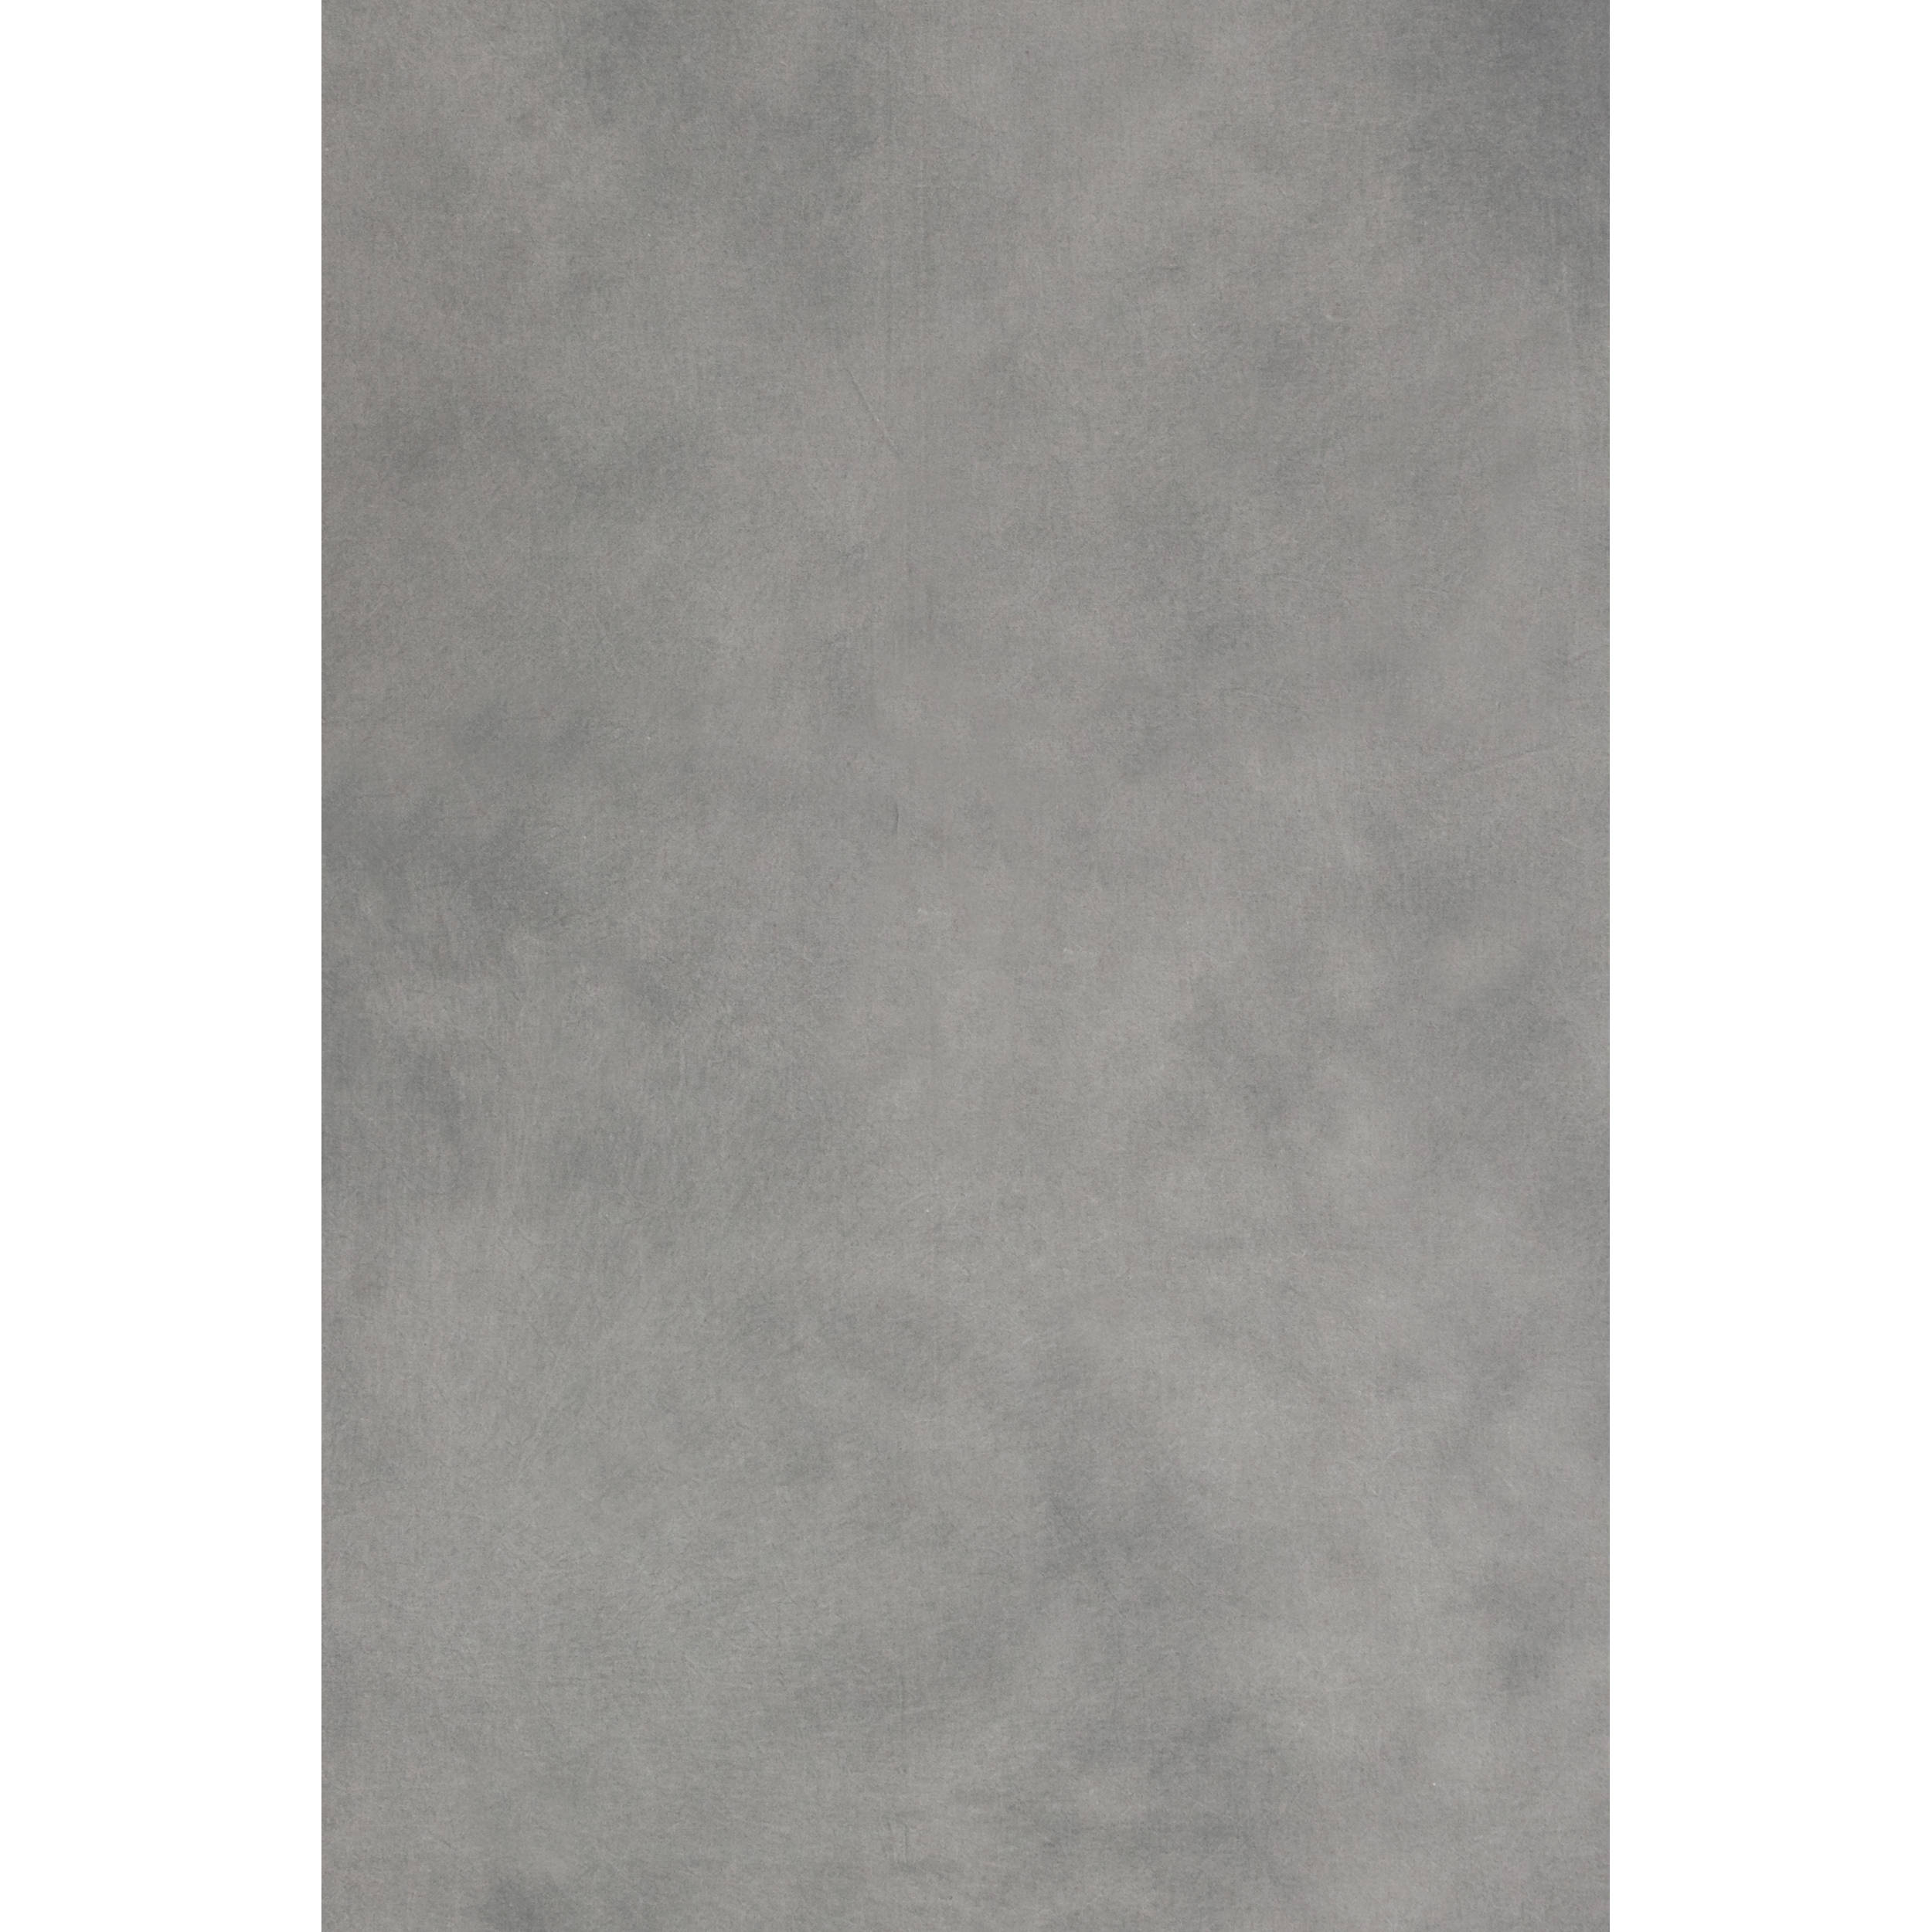 Backdrop Alley Hand Painted Muslin Bahp24whlgry B H